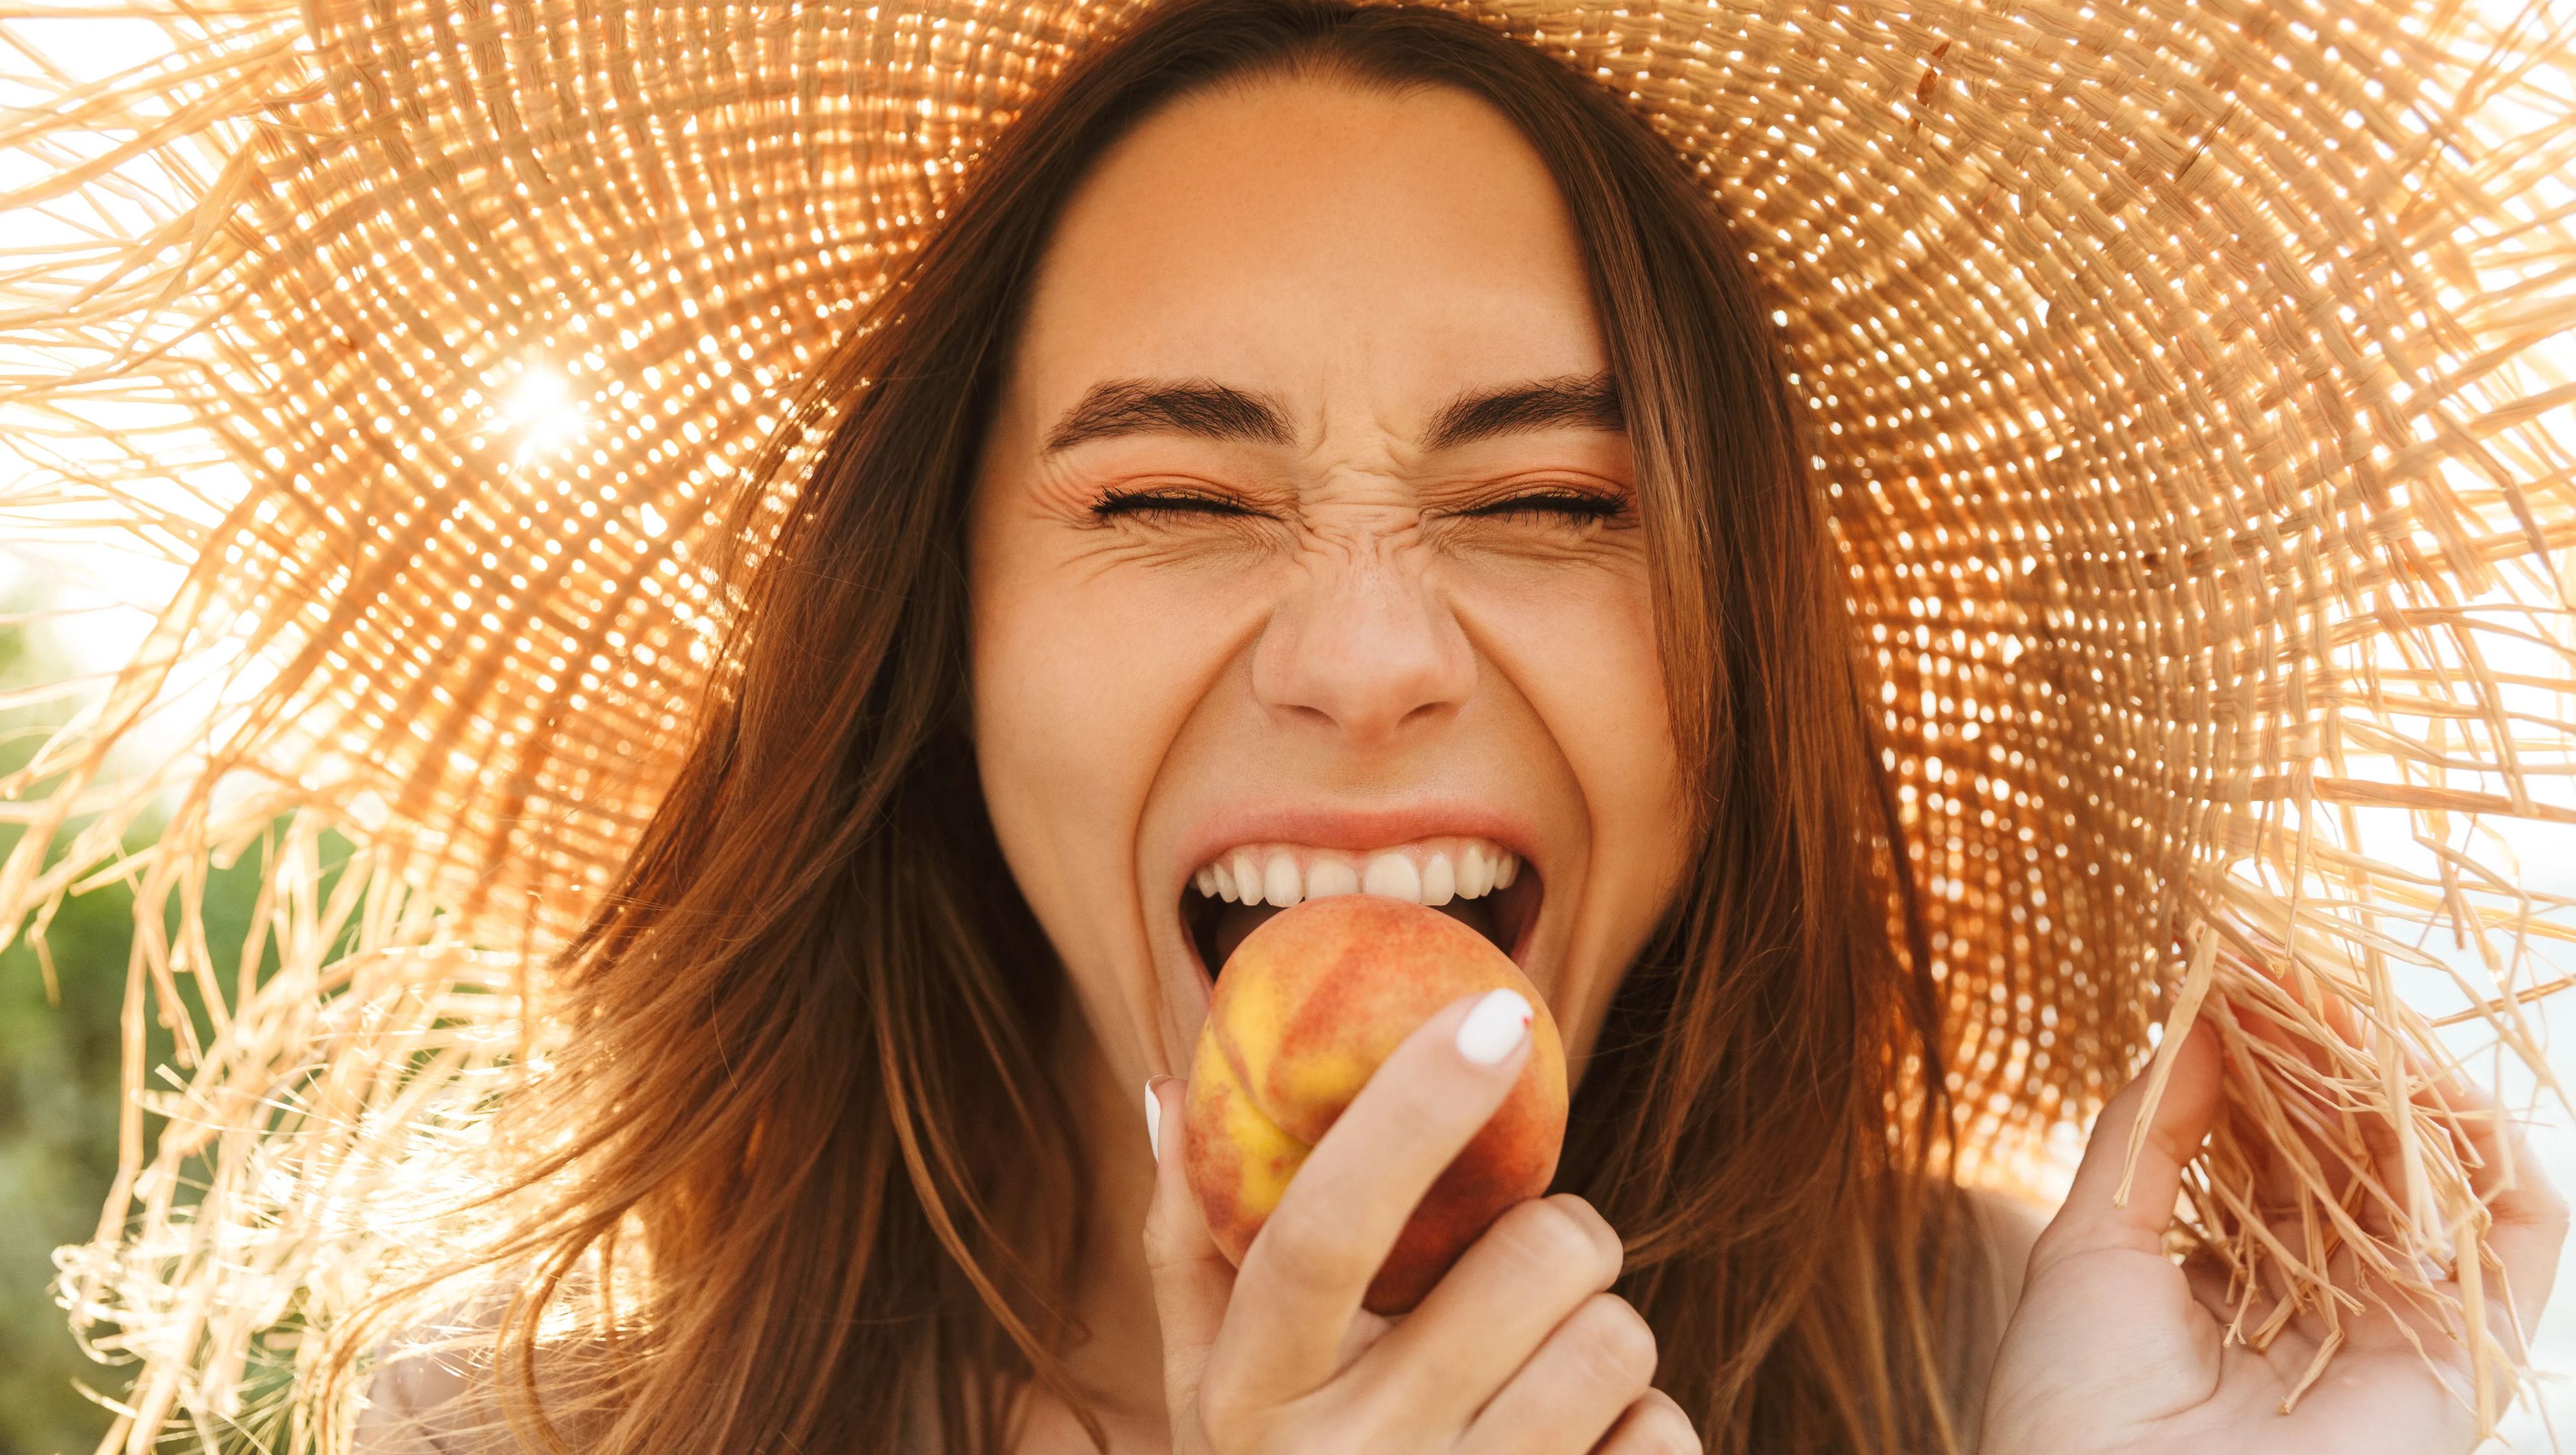 Young woman wearing straw hat bites into a peach. 